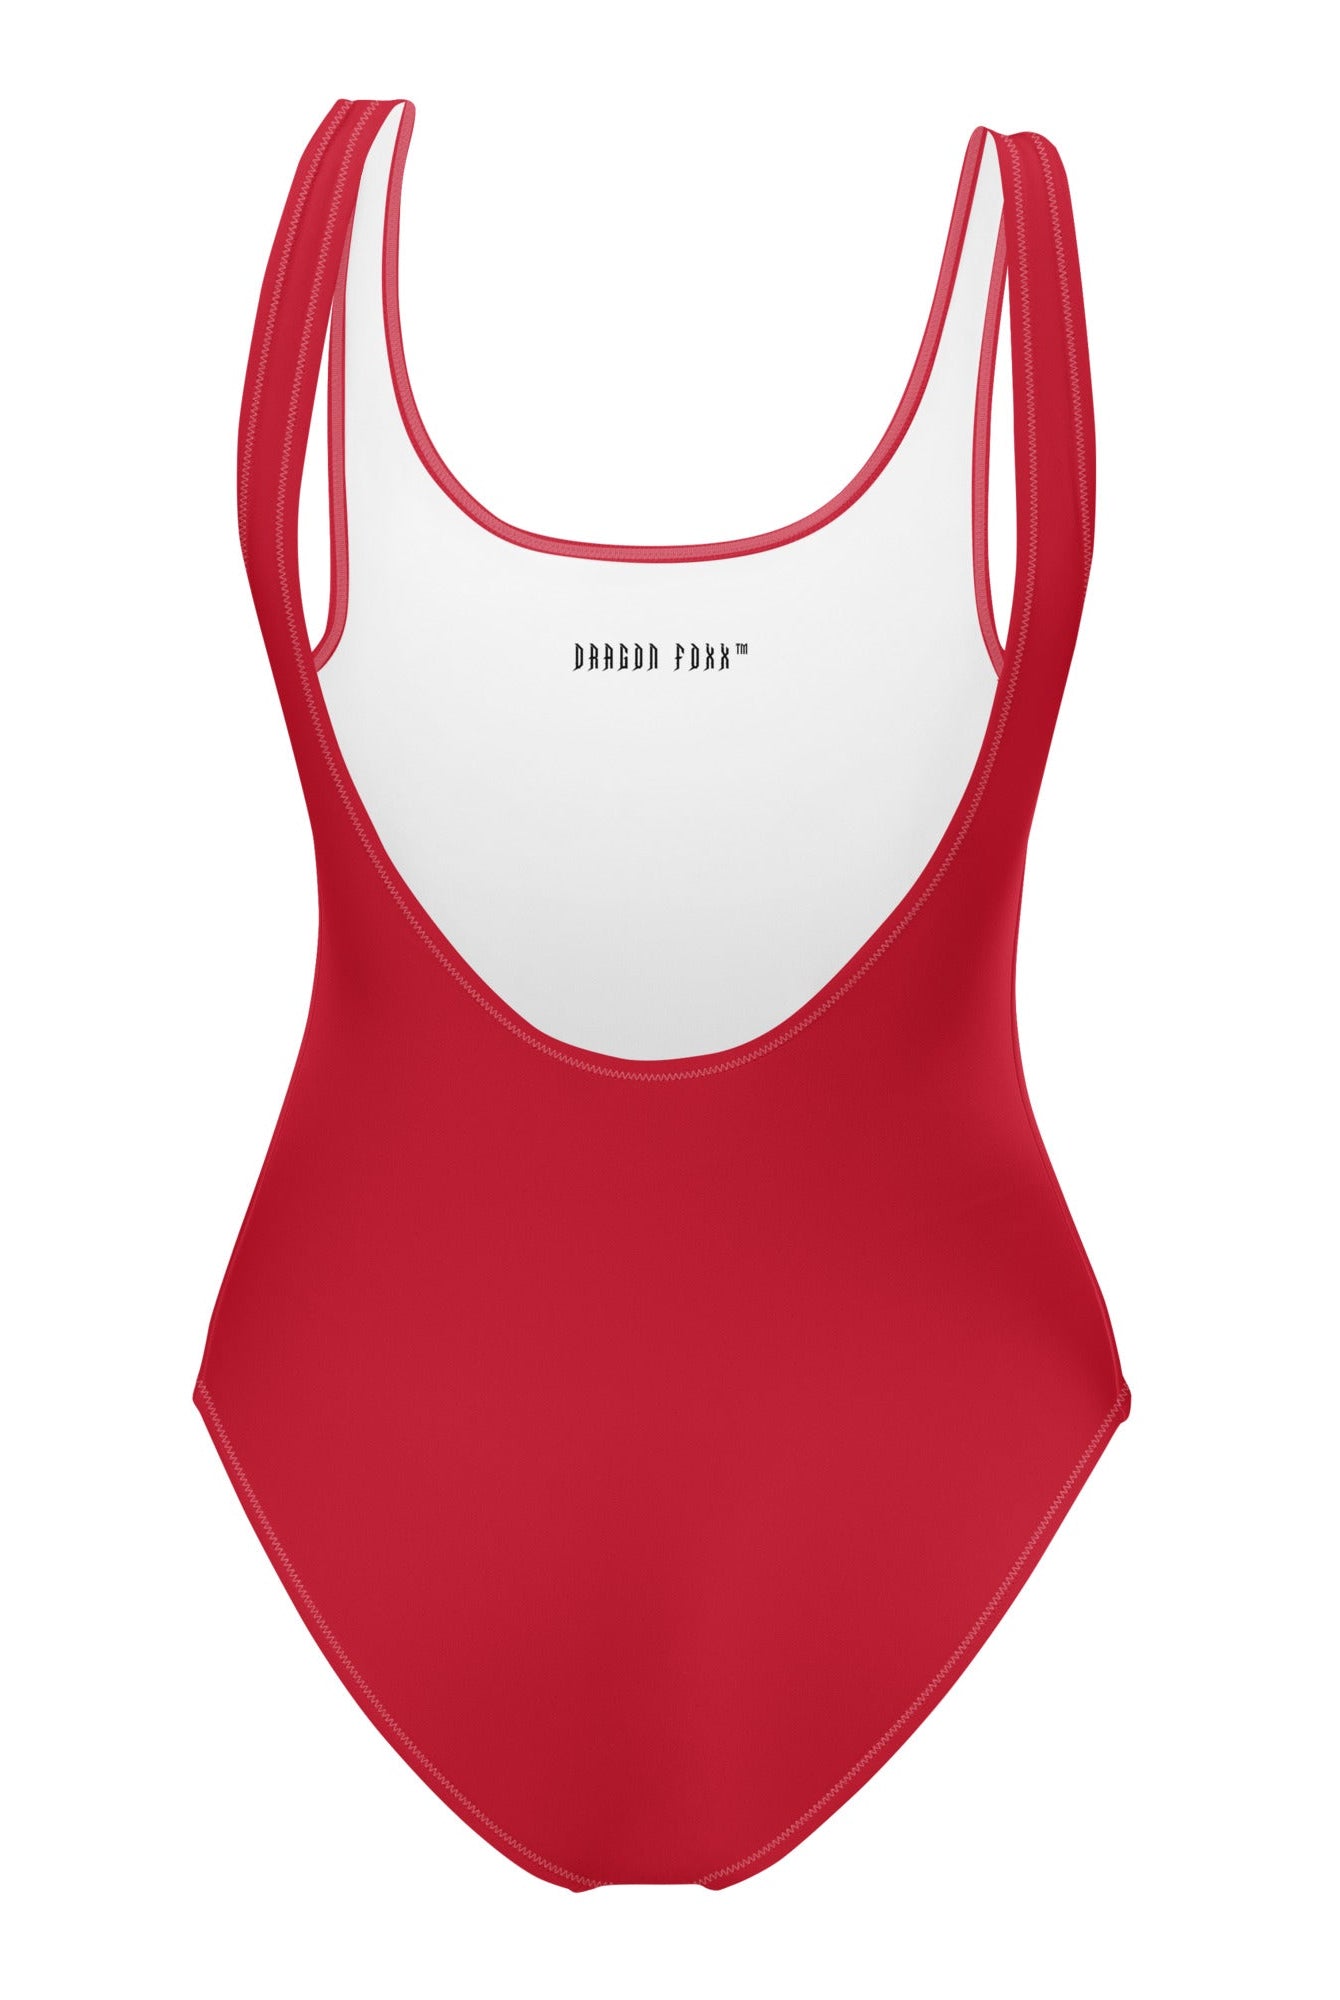 Red One-Piece Swimsuit - One-Piece Swimsuit - DRAGON FOXX™ - Red One-Piece Swimsuit - 9725350_9014 - XS - Red - One-Piece - Dragon Foxx™ - Dragon Foxx™ Red One-Piece Swimsuit - Dragon Foxx™ Swimsuit